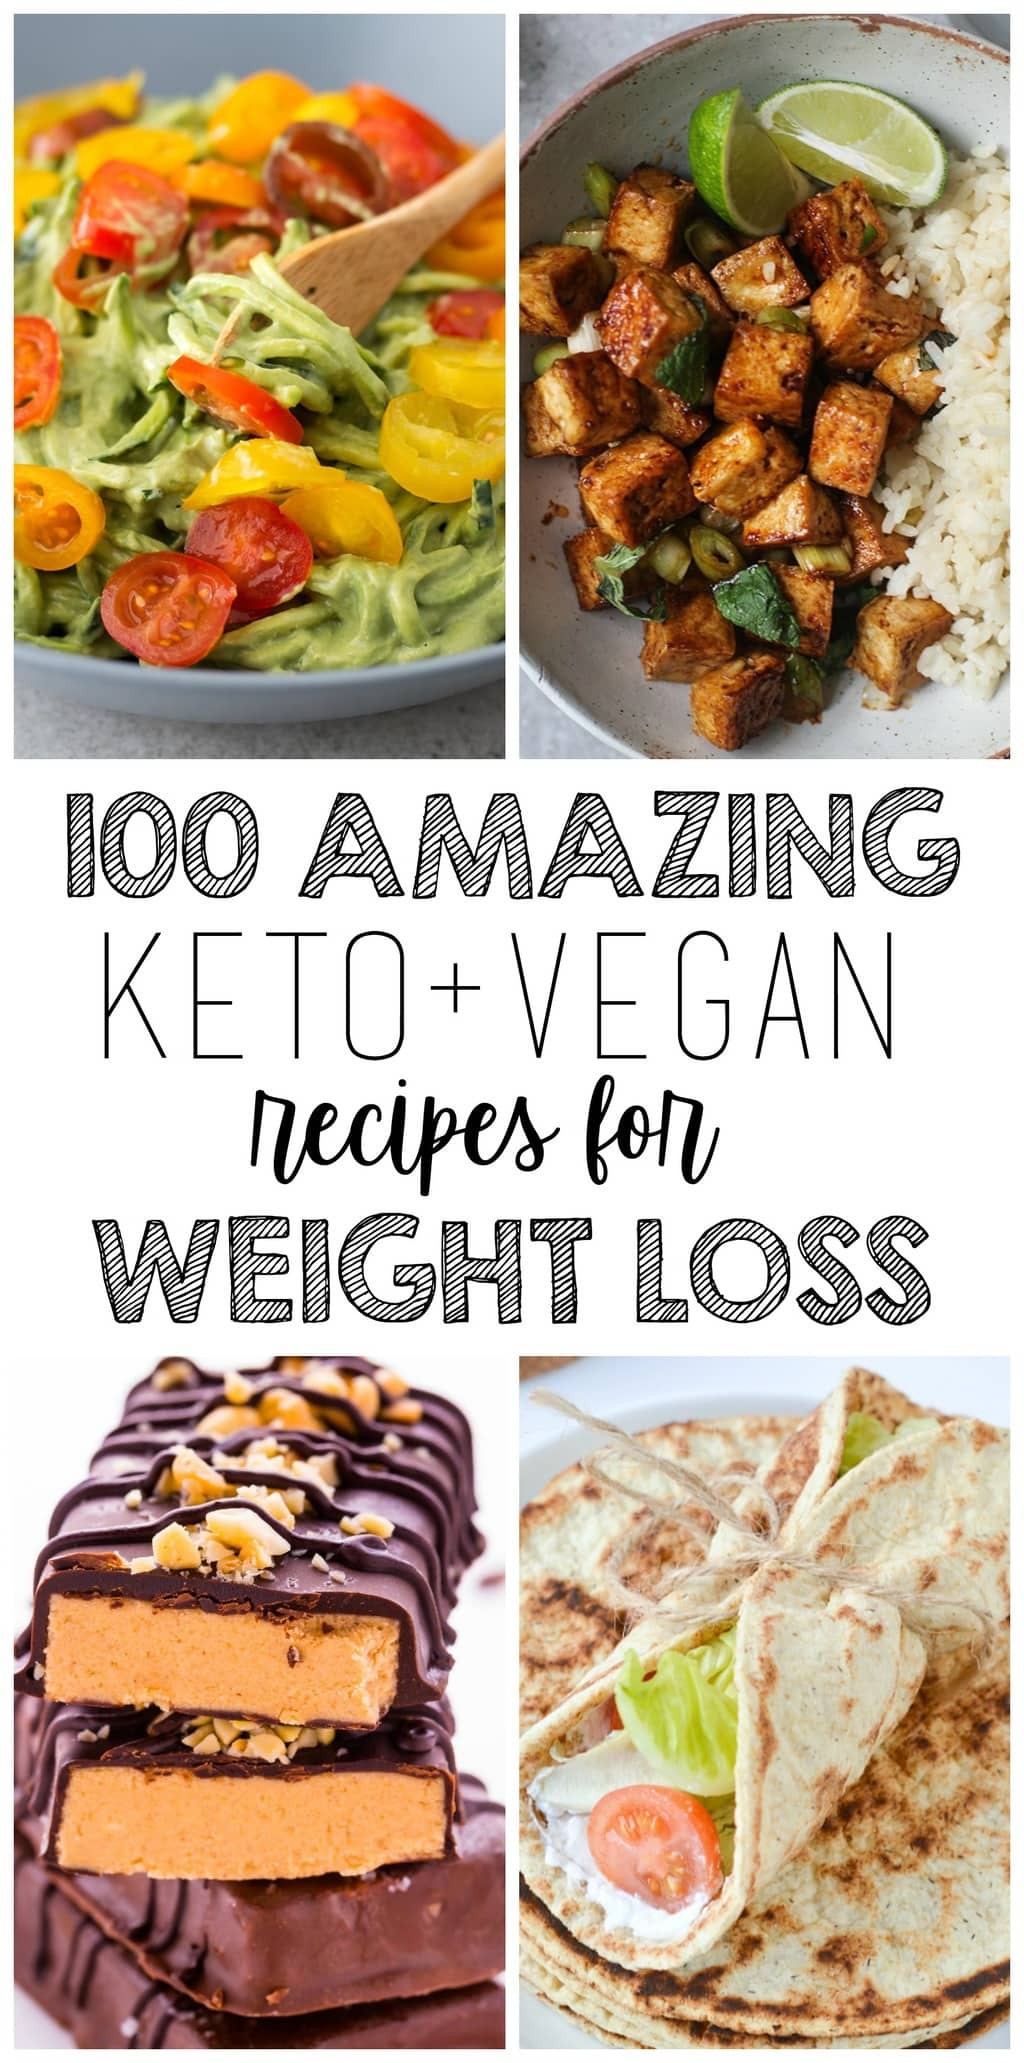 Vegetarian Keto Protein Sources
 100 AMAZING Keto Vegan Recipes For Weight Loss